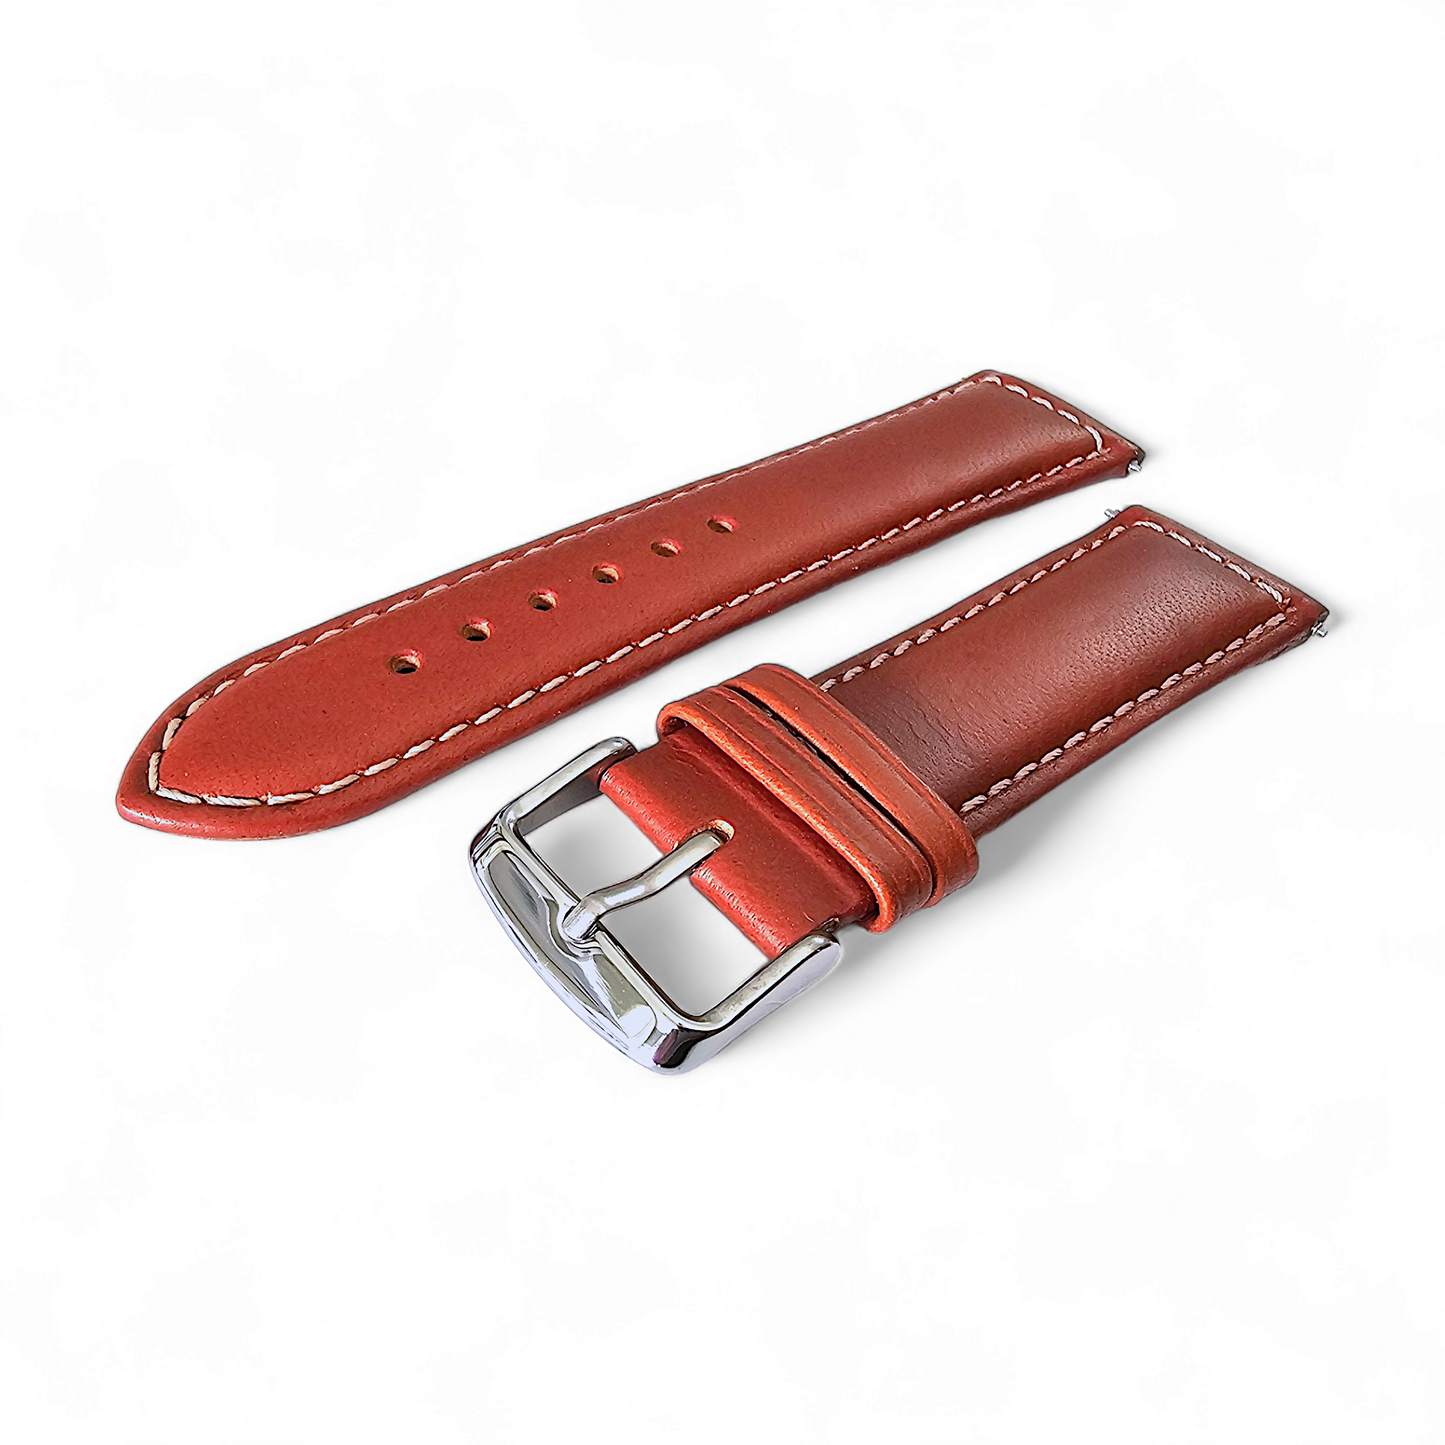 Italian Leather Classic Padded Watch Strap Band 18mm 20mm 22mm Chestnut Brown